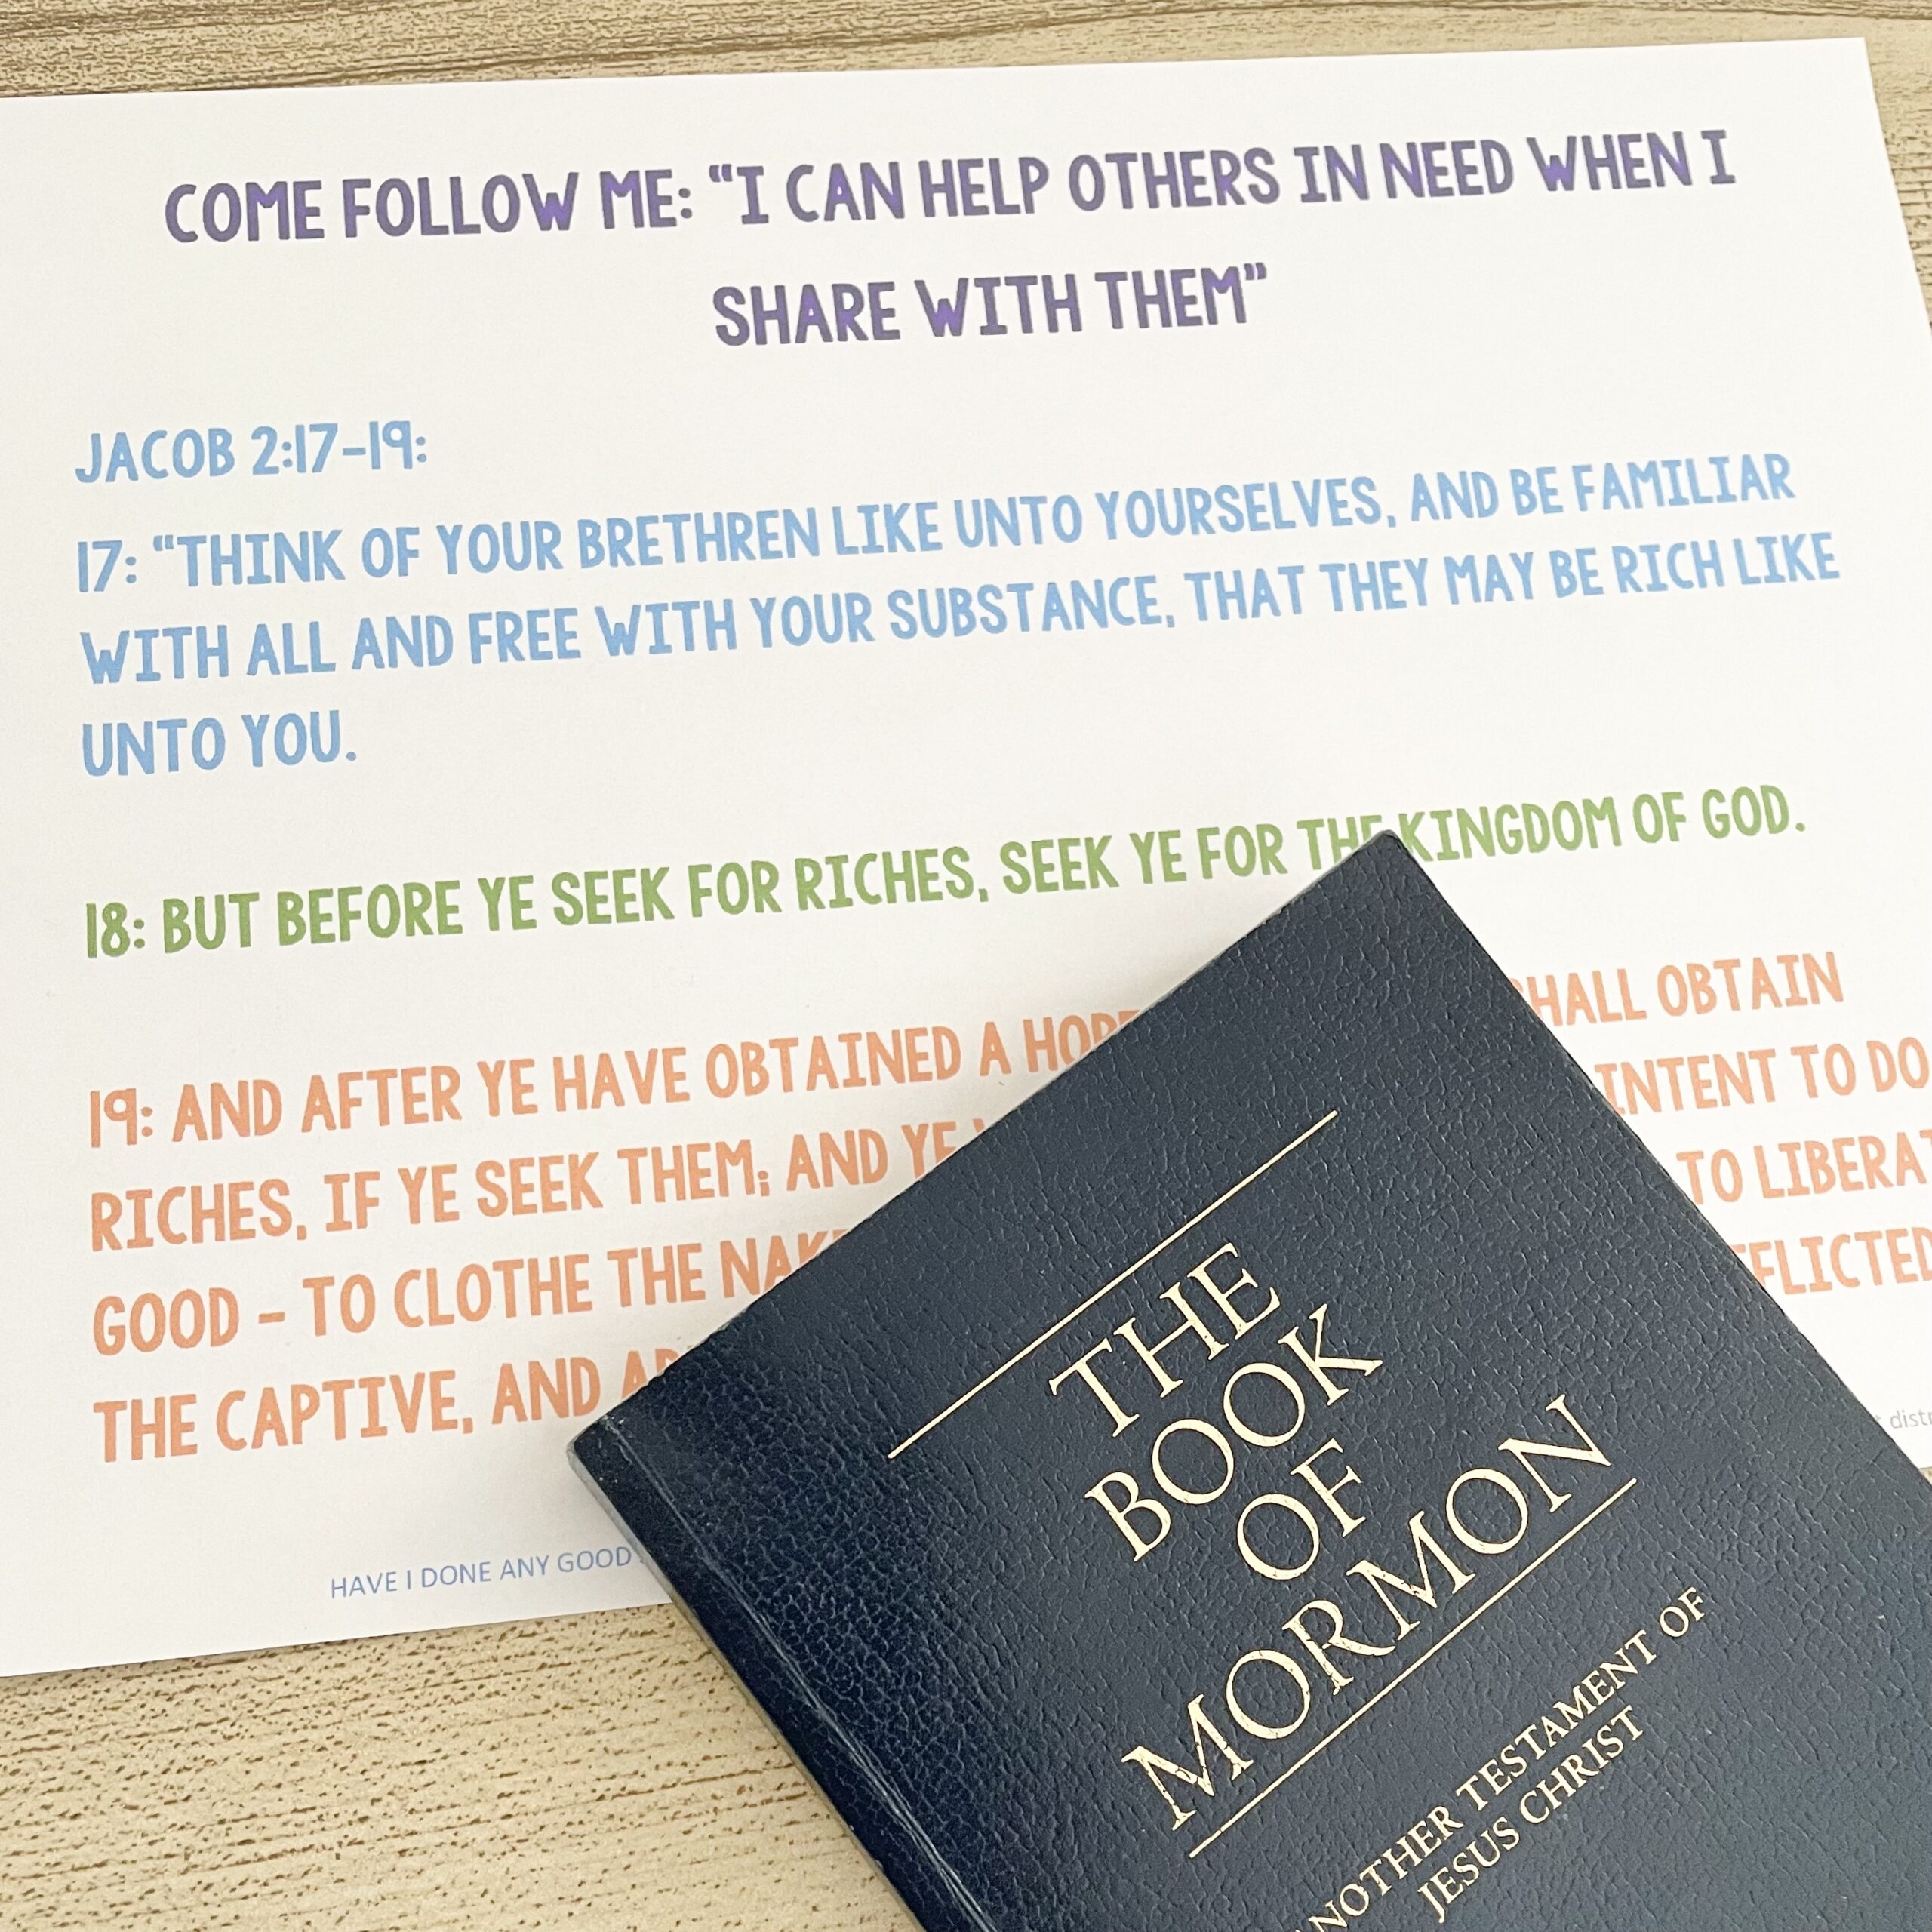 Have I Done Any Good Scripture Connection - Use this spiritual connection singing time idea and share scriptures from Come Follow Me to review this song with printable song helps for LDS Primary Music Leaders.